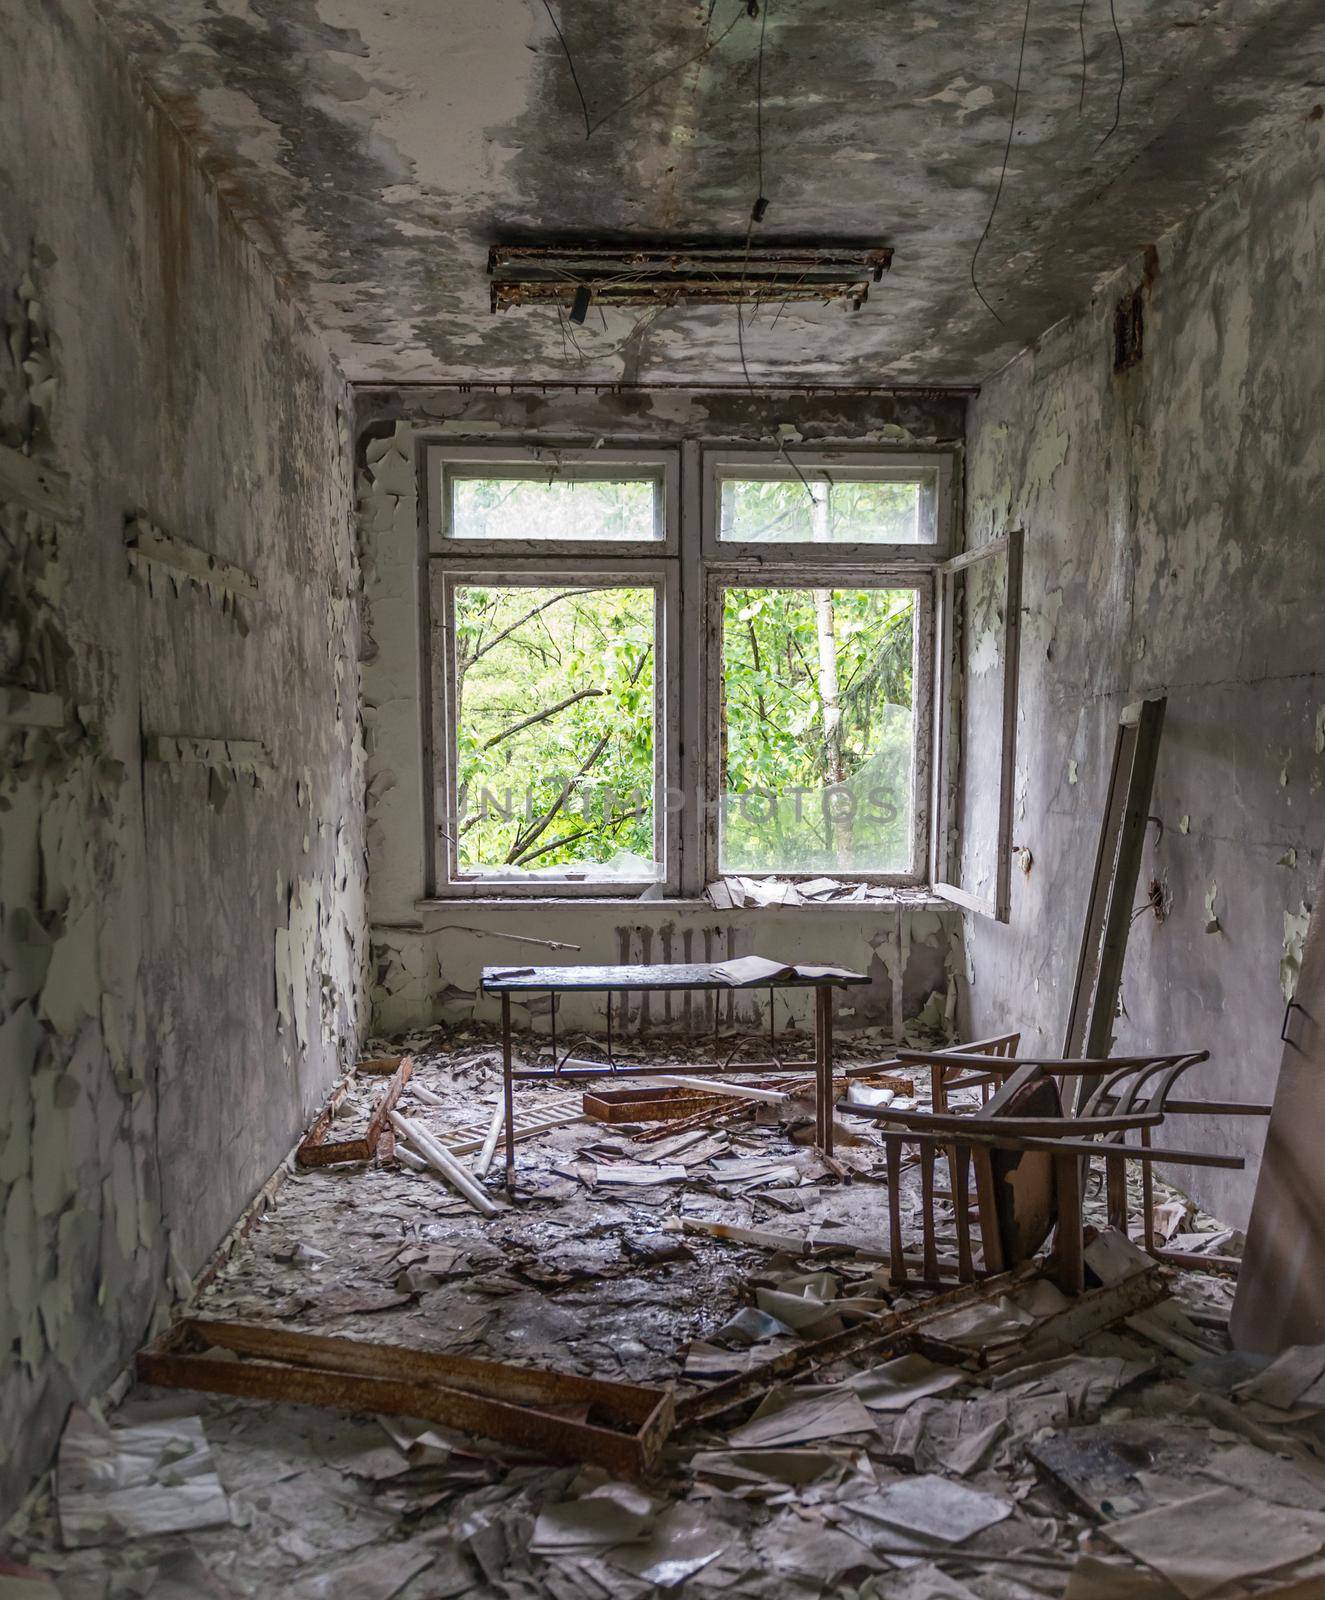 abandoned school study with debris and broken furniture by tan4ikk1